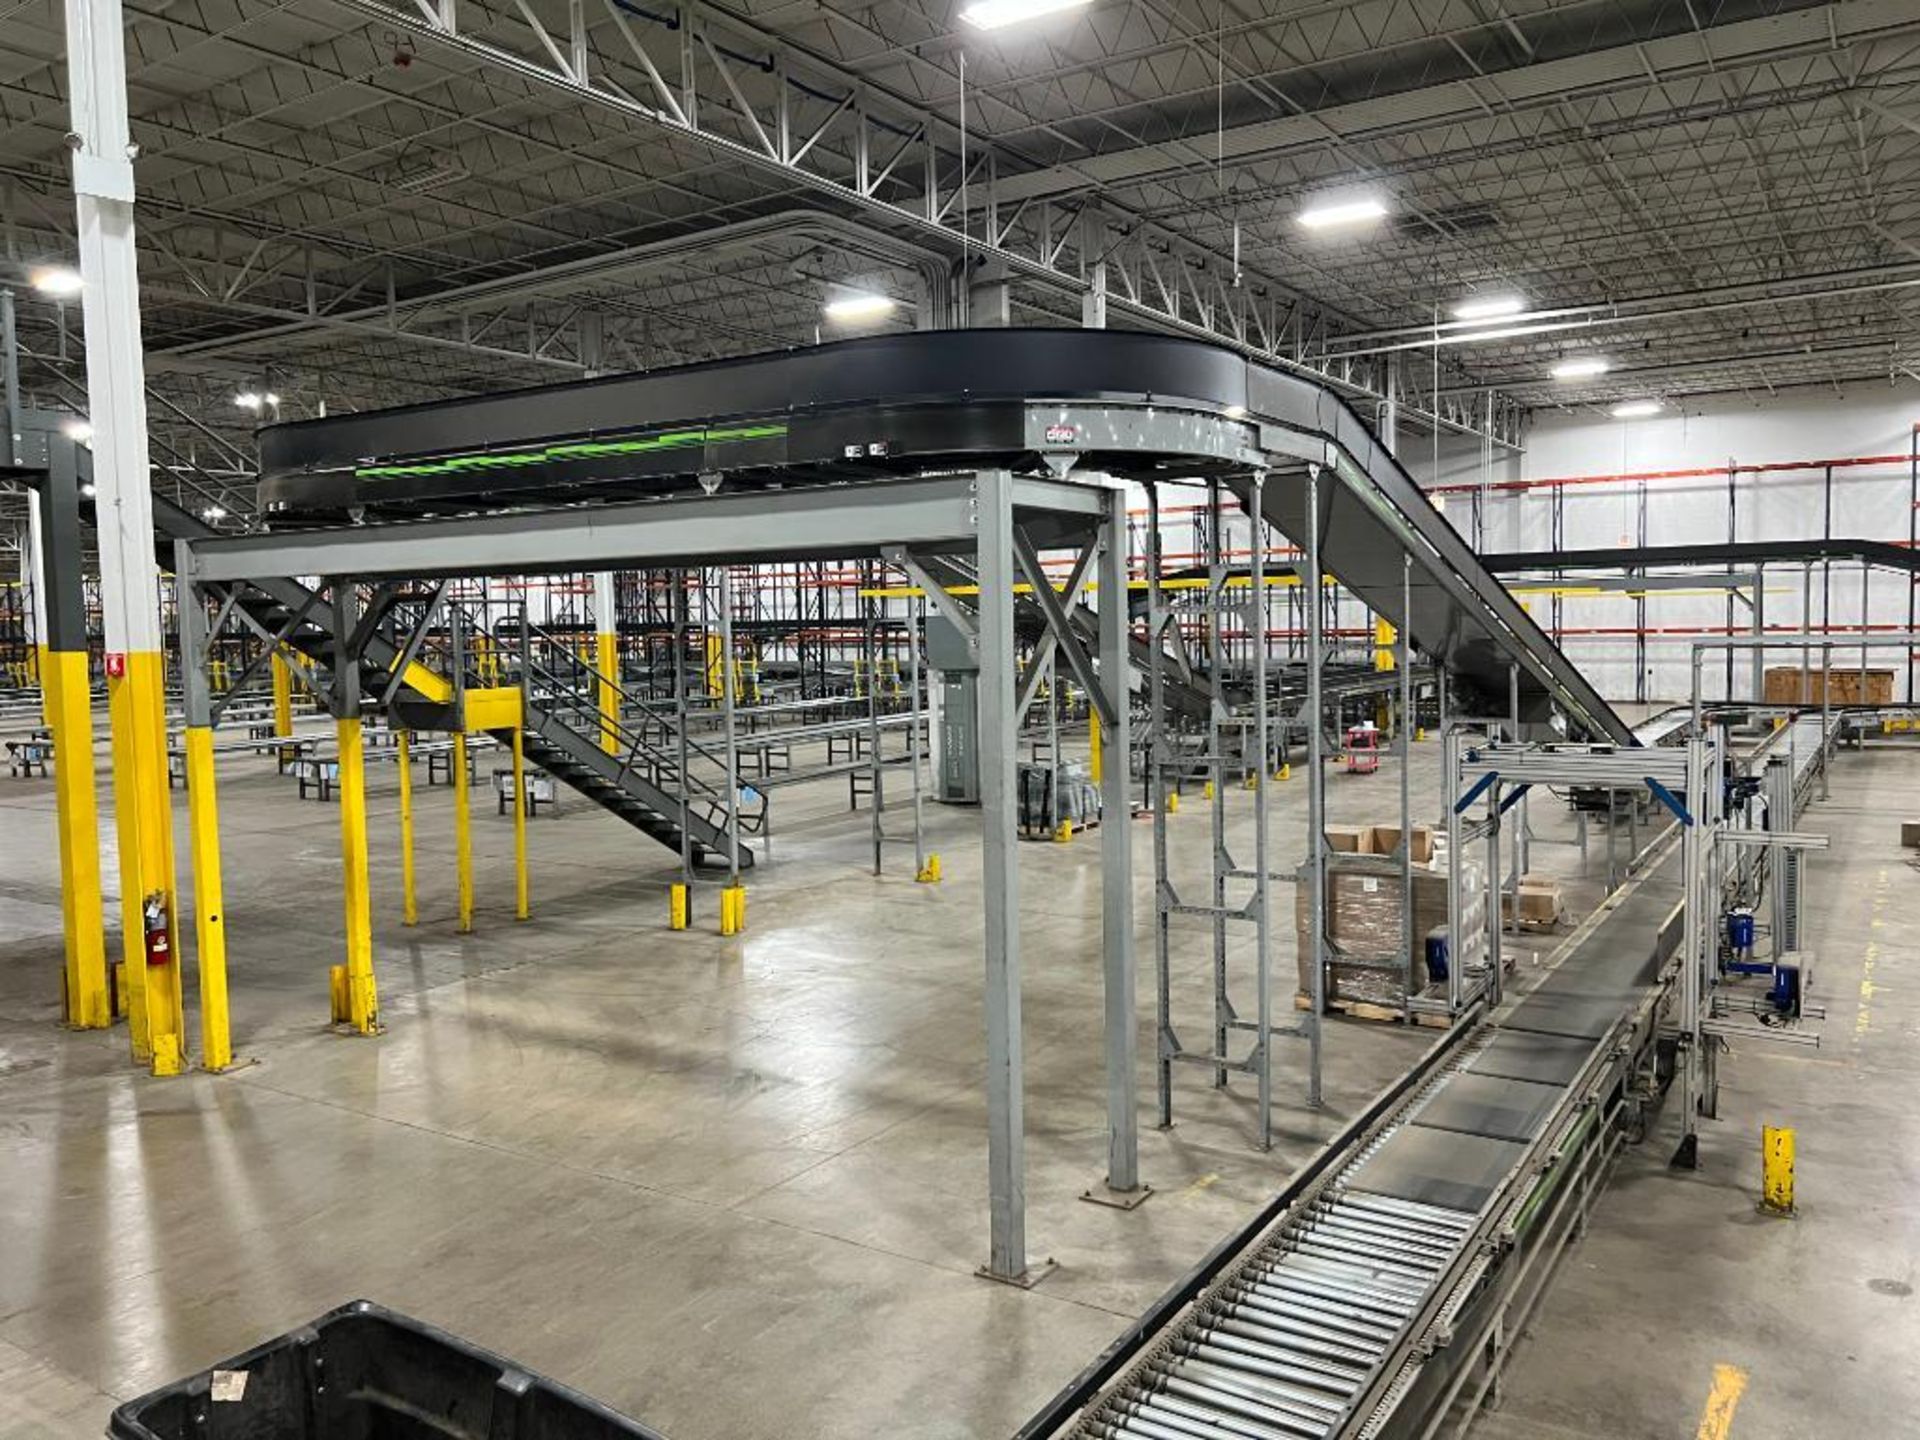 LOT: World Source Automated Conveyor System (2013) consisting of: Approx. 405' x 4' Sorter Conveyor, - Image 73 of 119